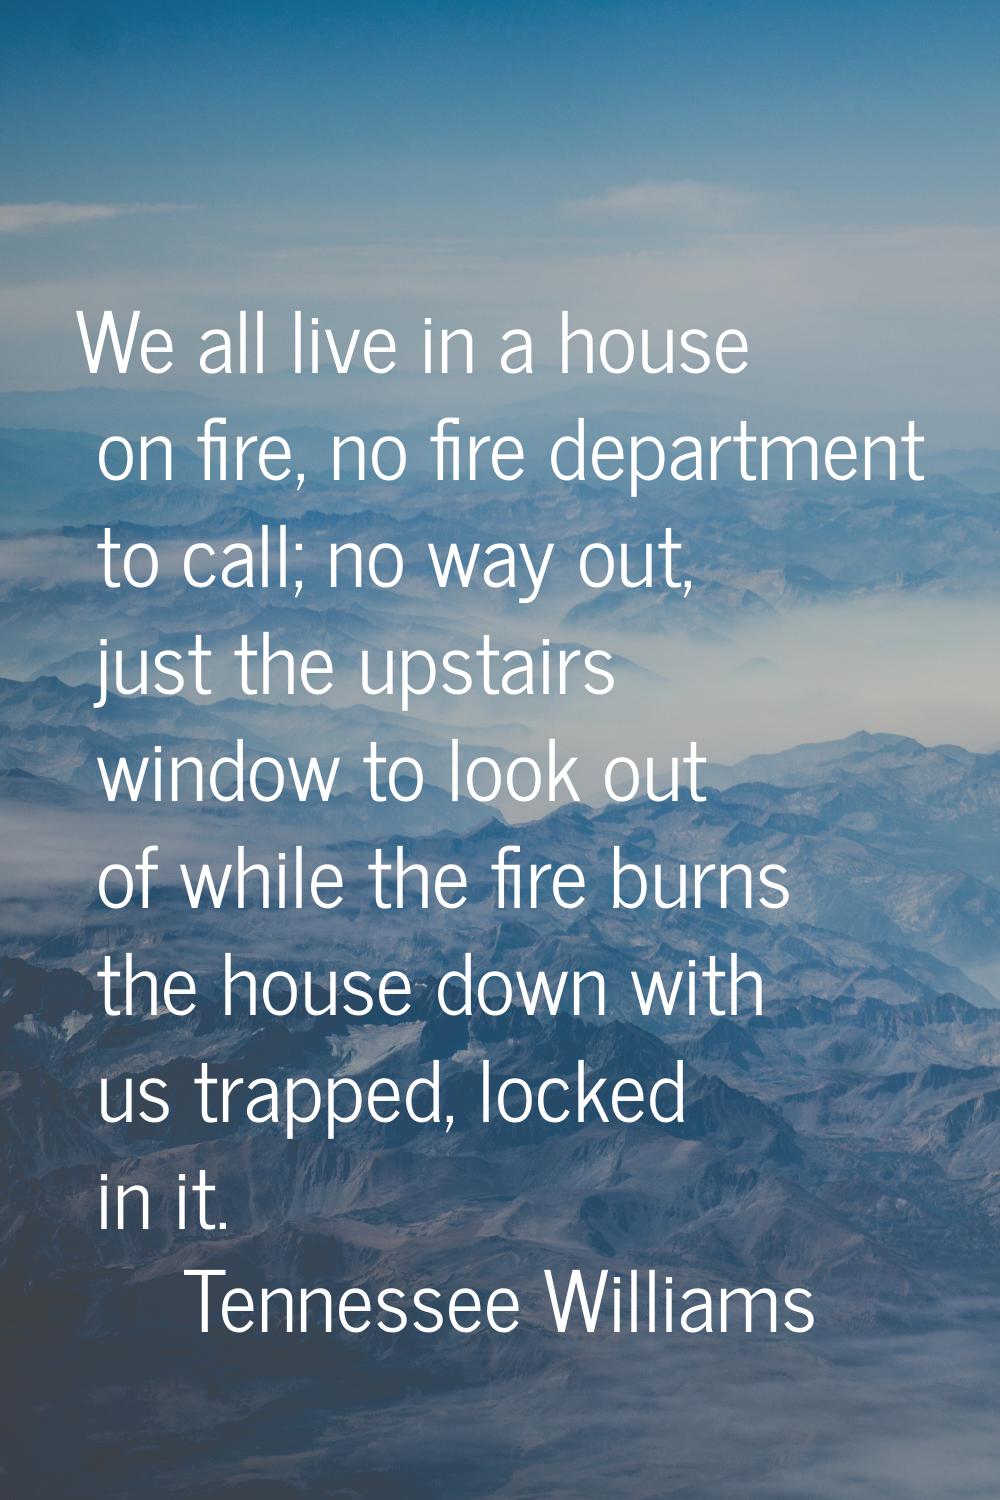 We all live in a house on fire, no fire department to call; no way out, just the upstairs window to